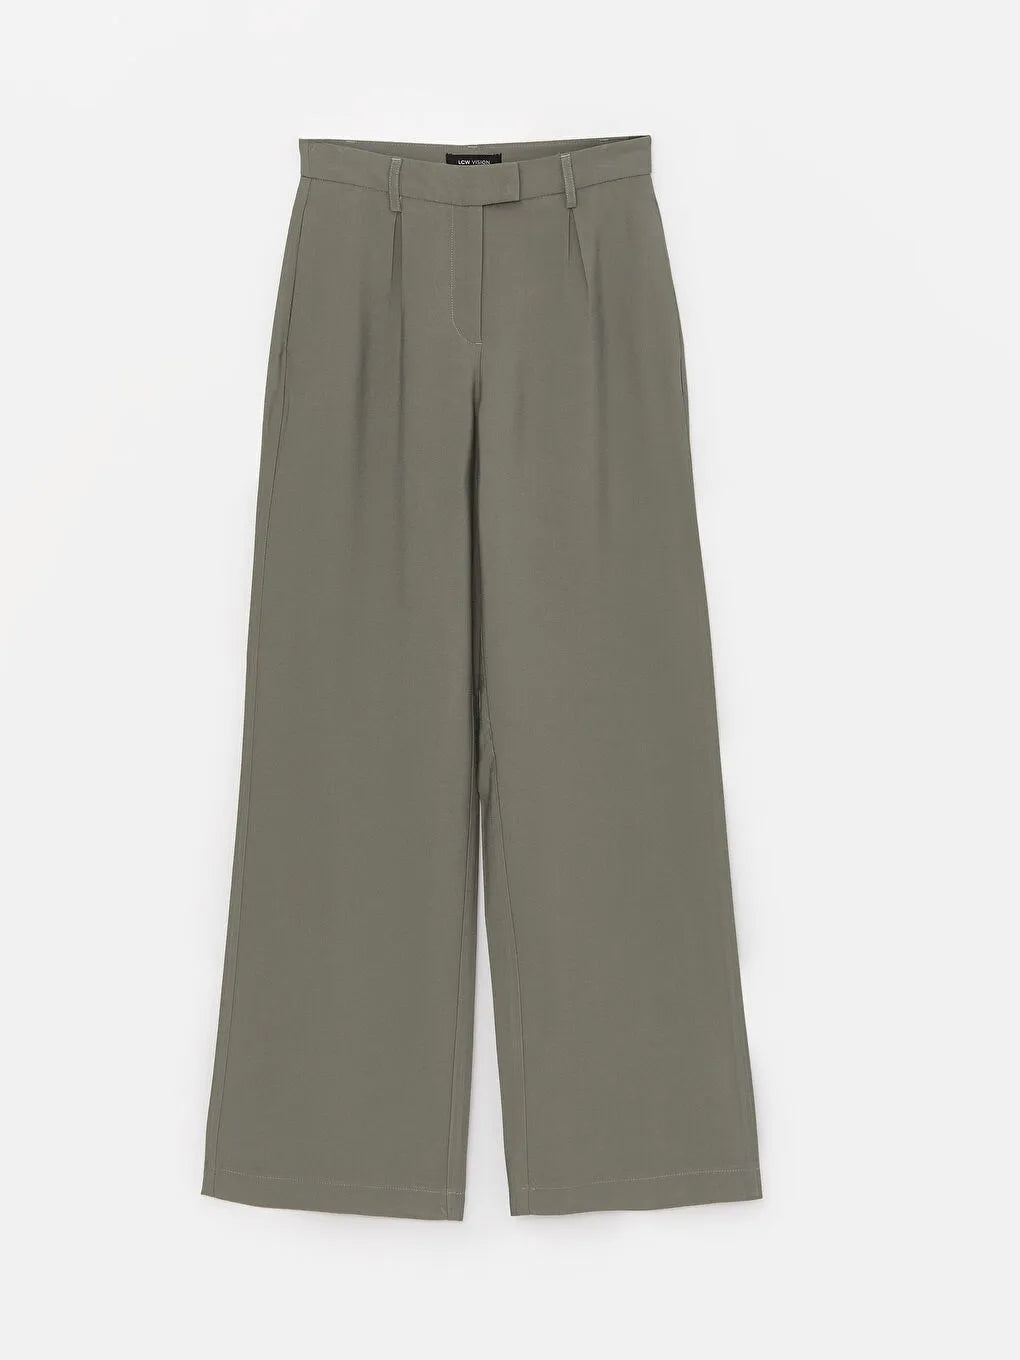 COMFY FIT WIDE LEGGED FORMAL PANTS IN GREY